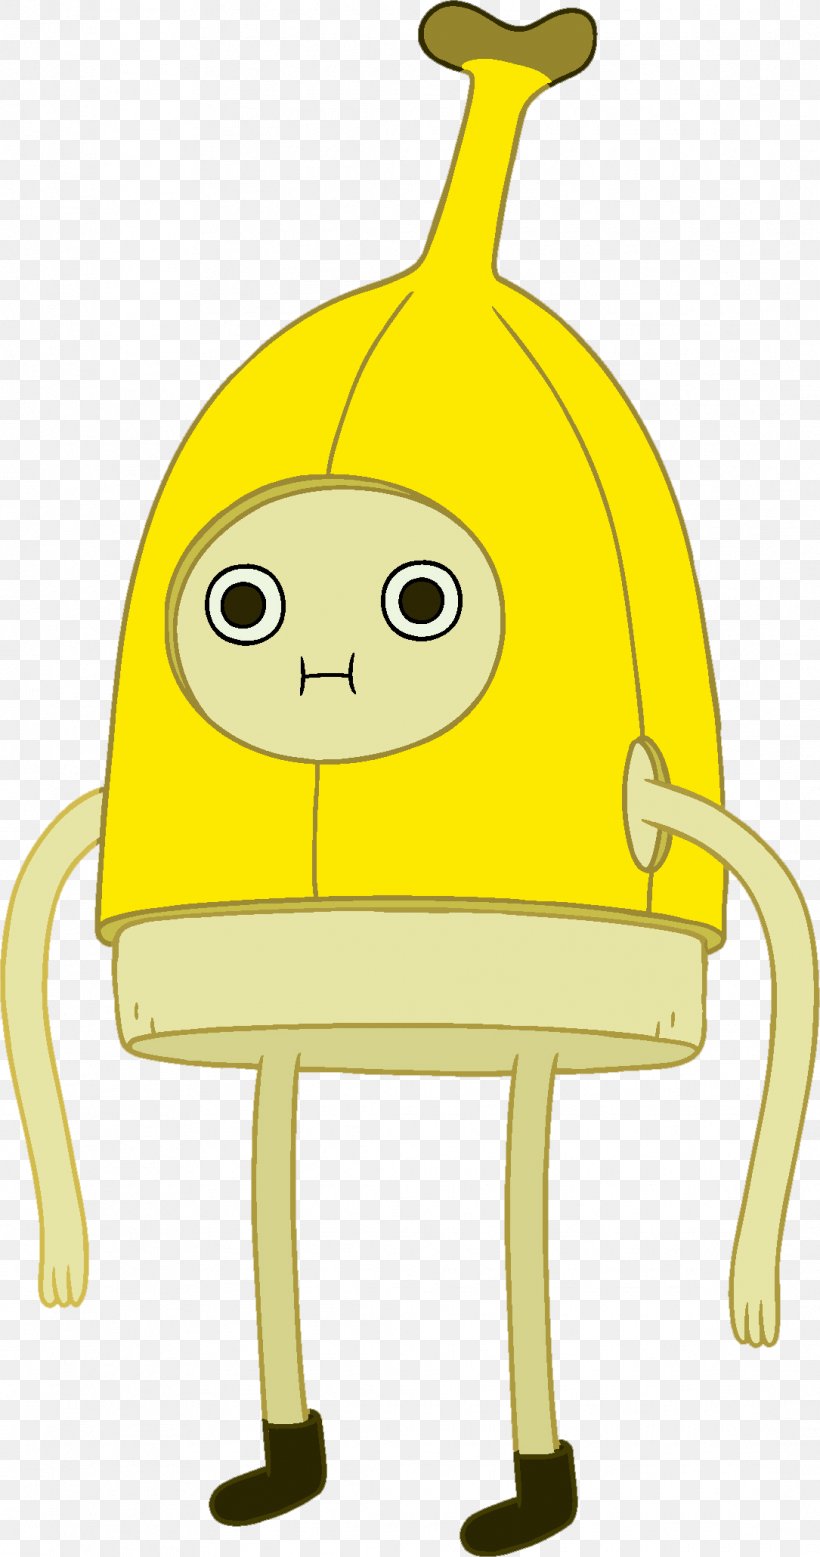 Ice King Finn The Human Jake The Dog Marceline The Vampire Queen Princess Bubblegum, PNG, 1085x2061px, Ice King, Adventure, Adventure Time, Adventure Time Season 2, Adventure Time Season 3 Download Free